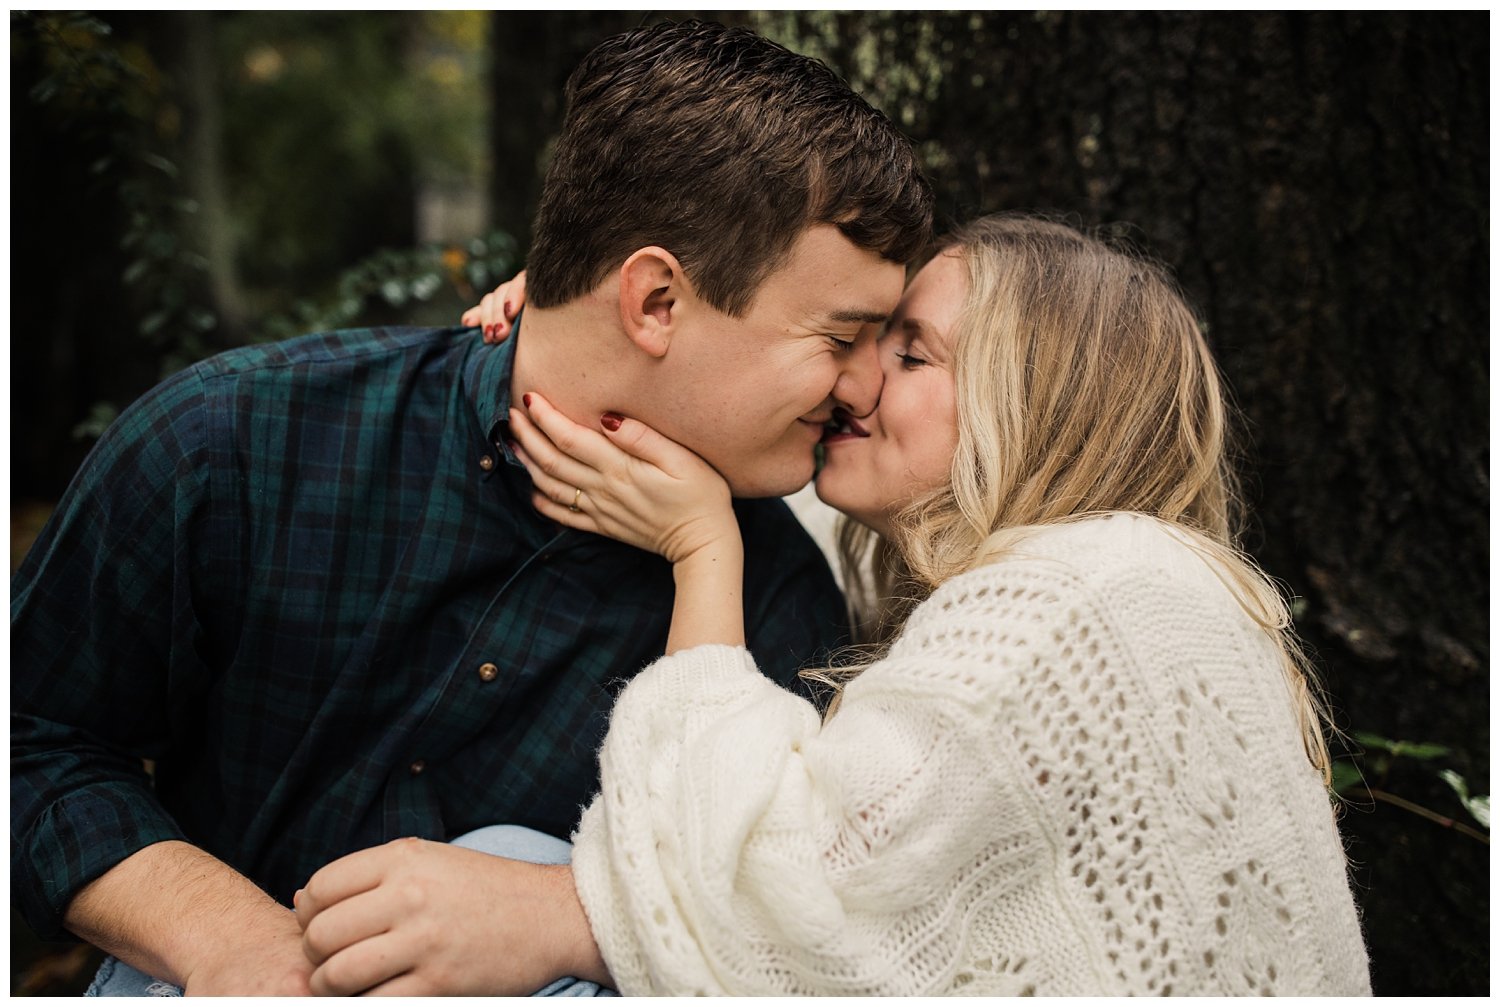 rainy day engagement session in marietta, georgia with cute couple sitting and kissing under a tree